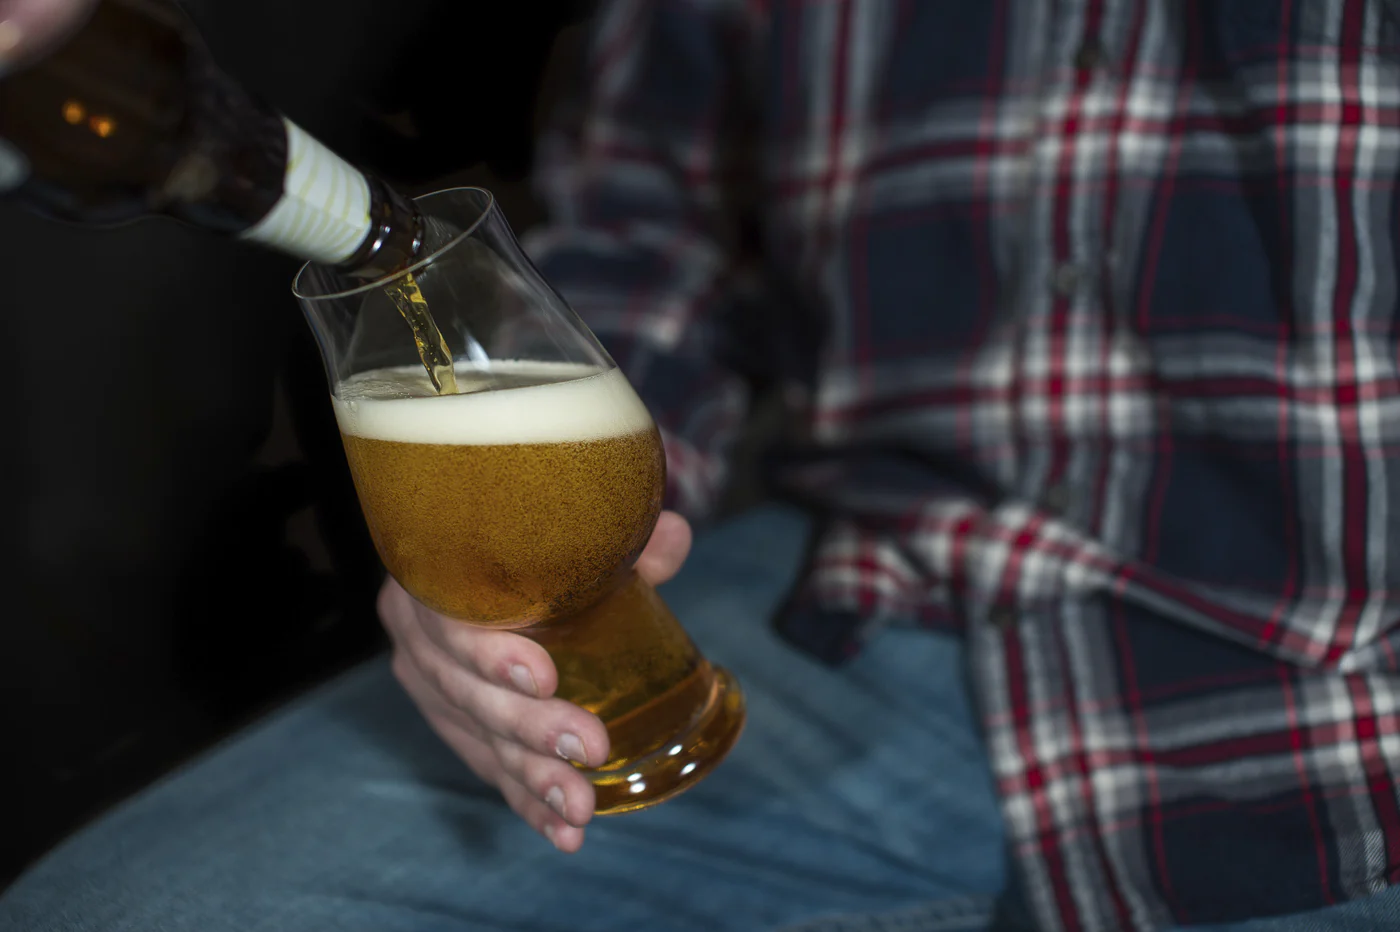 TO TILT OR NOT TO TILT: HOW TO PROPERLY POUR A BEER (AND WHY)